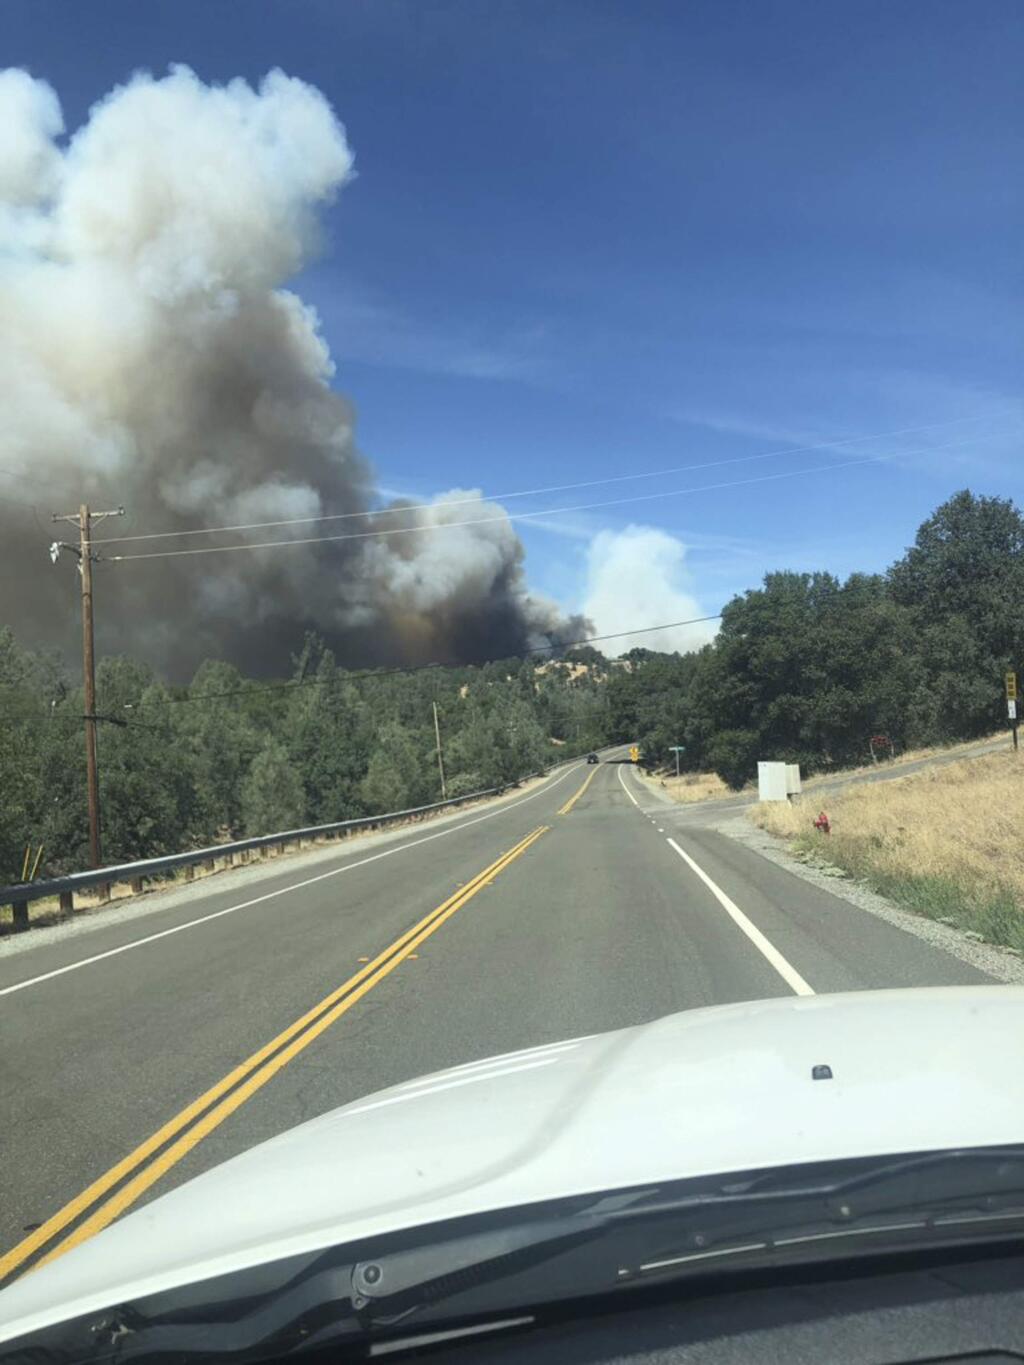 This photo provided by Cal Fire shows the Mountain fire burning Thursday, Aug. 22, 2019, near Redding, Calif. (Cal Fire via AP)